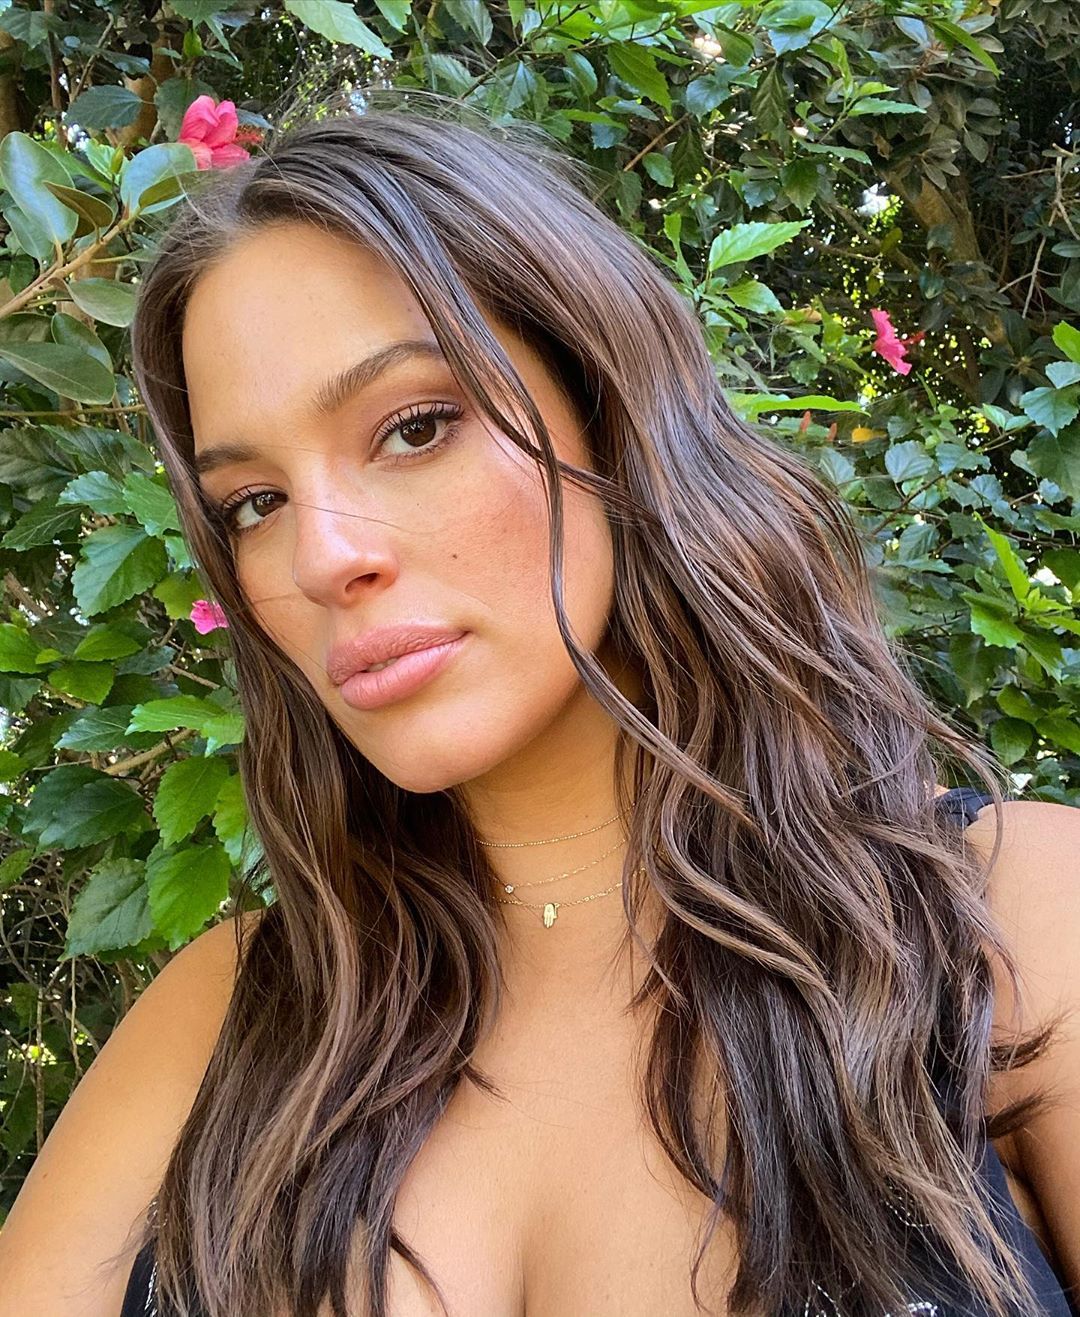 Long Hair Pregnant Nude - Ashley Graham just posted a very pregnant naked selfie